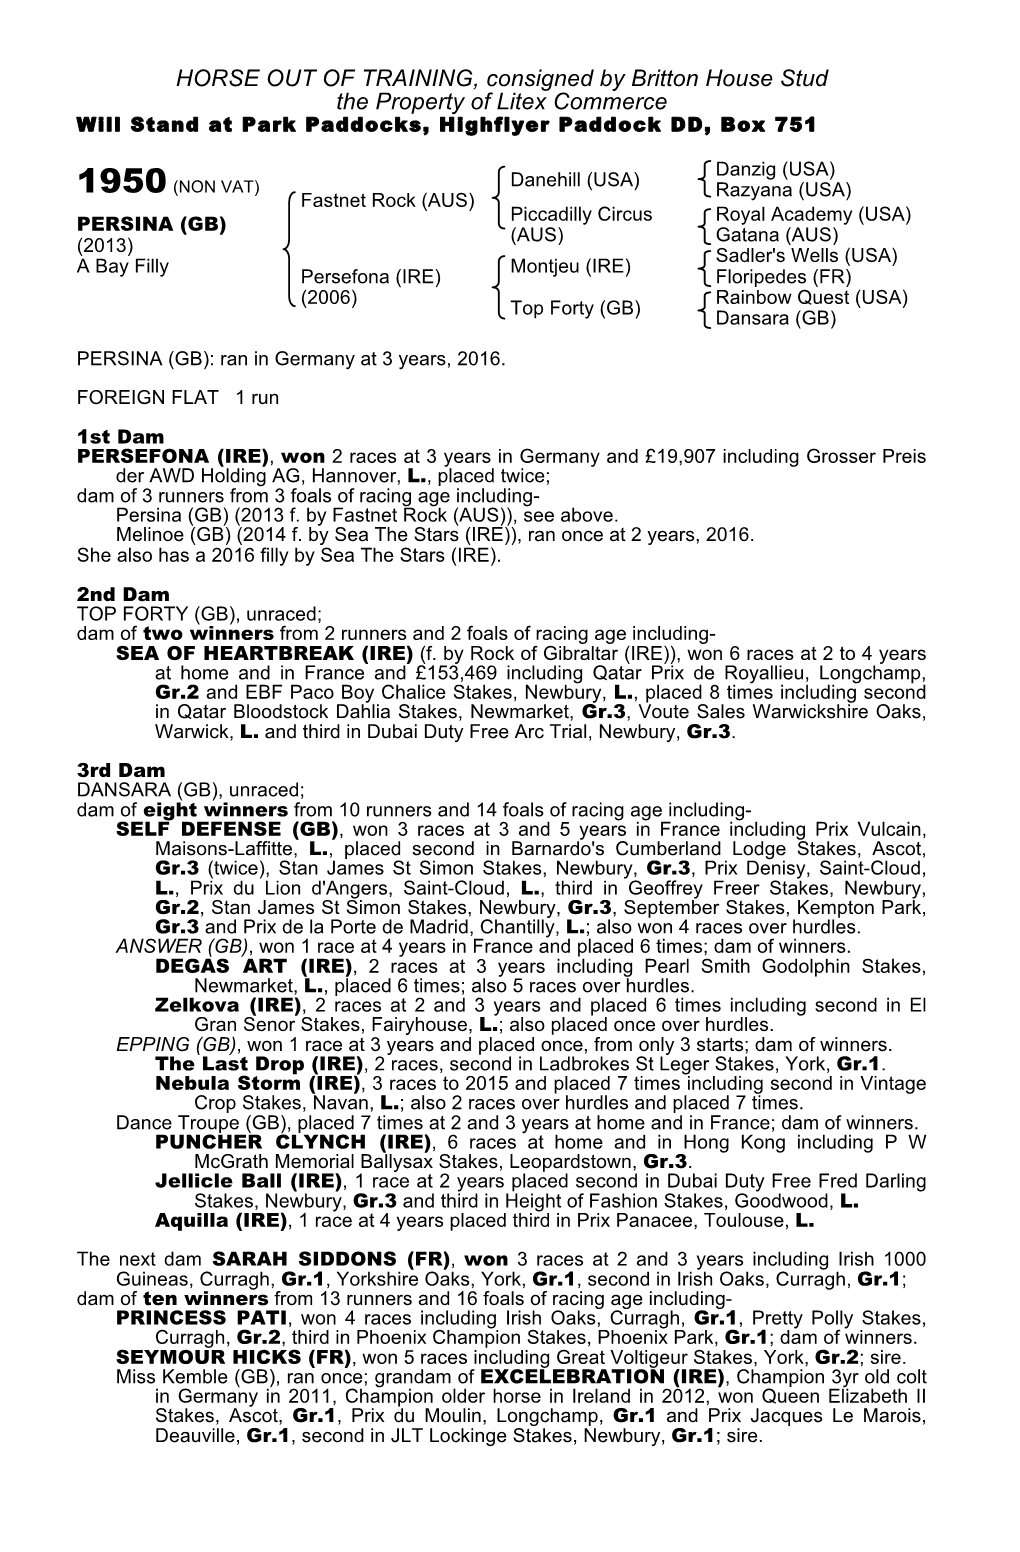 HORSE out of TRAINING, Consigned by Britton House Stud the Property of Litex Commerce Will Stand at Park Paddocks, Highflyer Paddock DD, Box 751